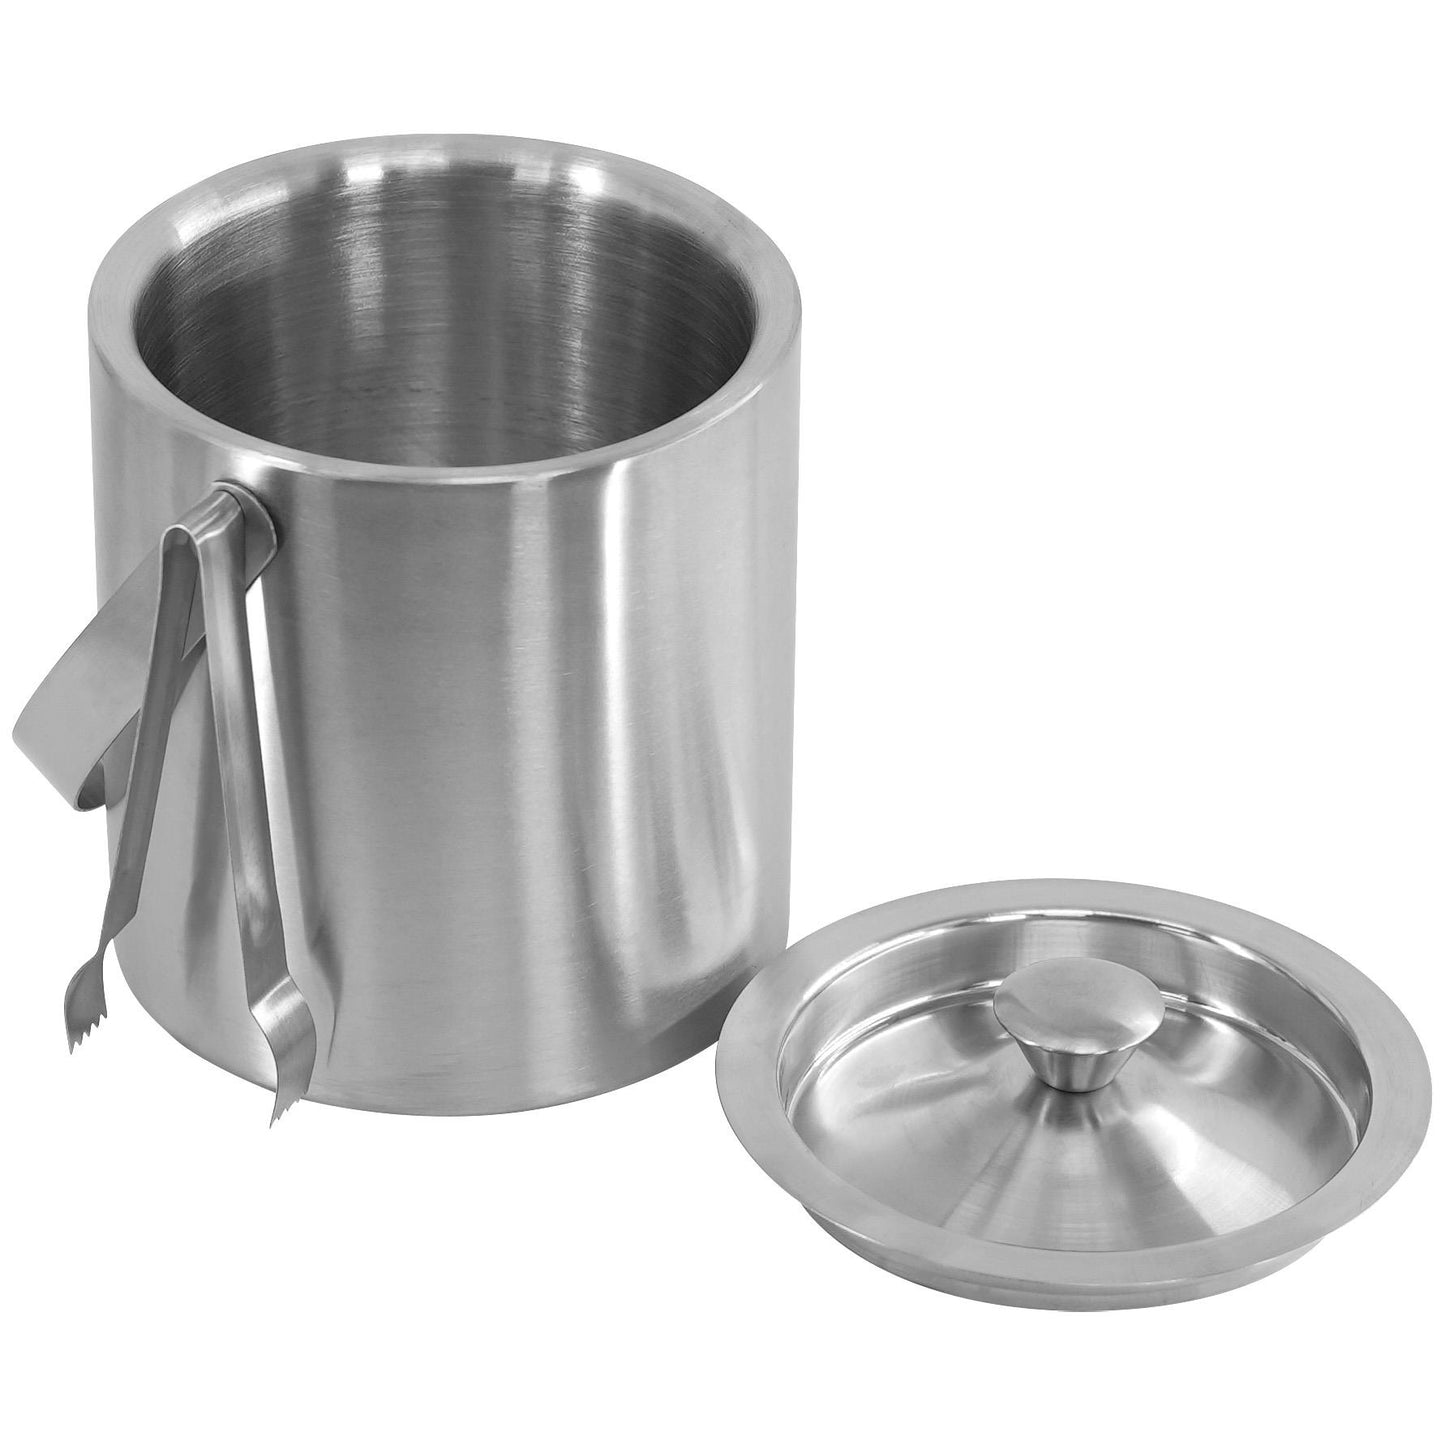 Stainless Steel Ice Bucket With Lid And Ice Tongs by Geezy - UKBuyZone